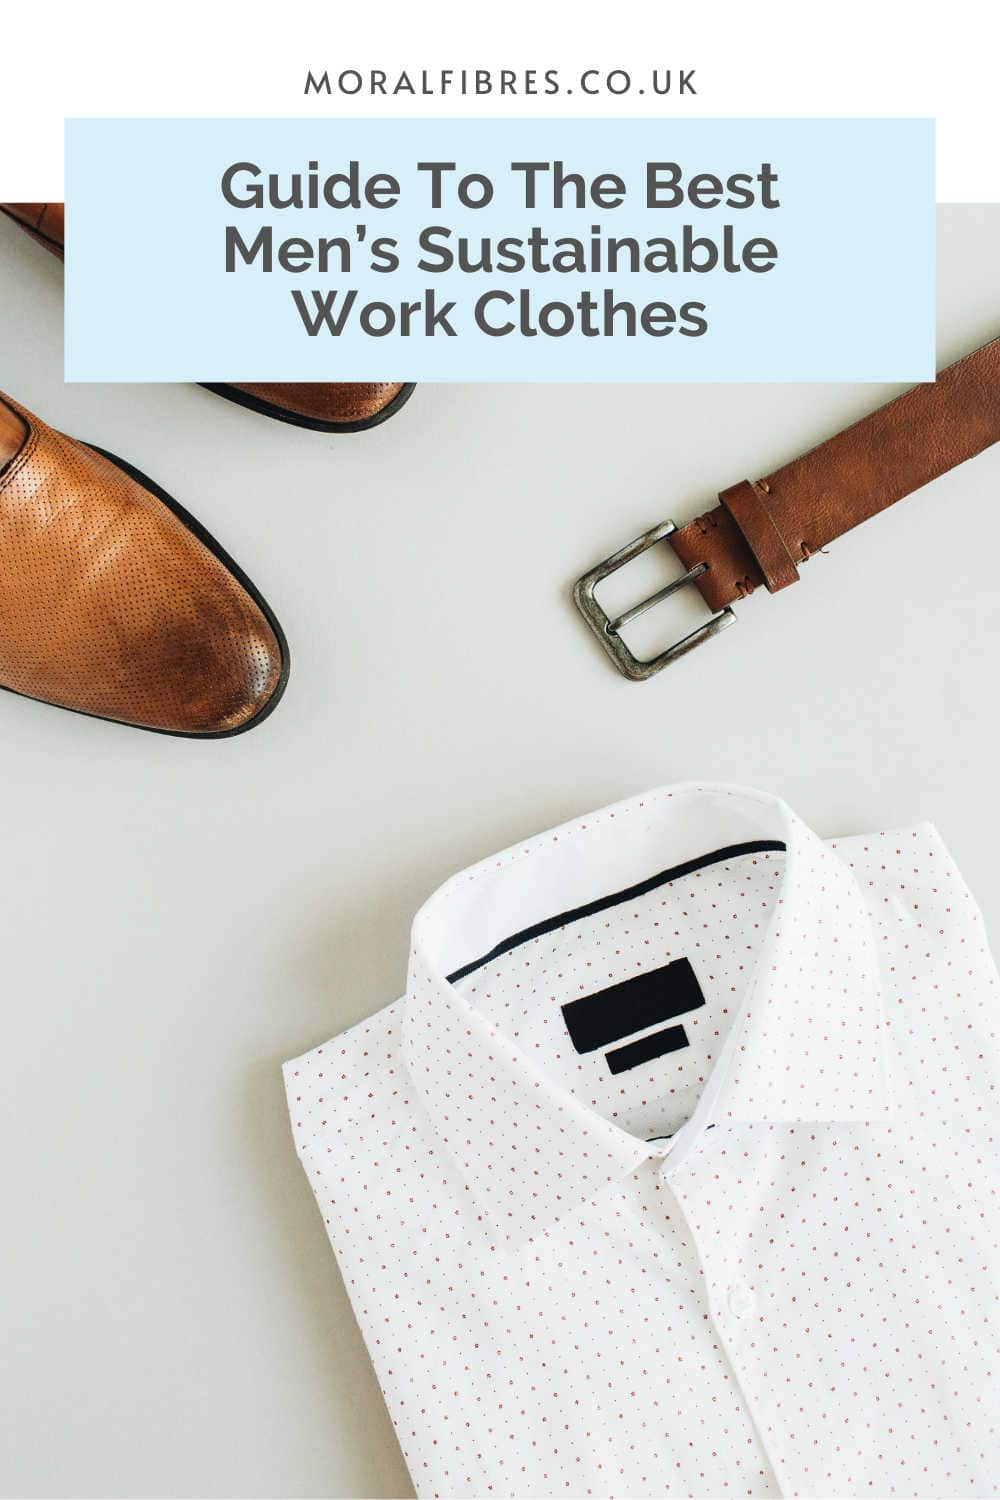 Smart Sustainable Men's Clothes For Work In The UK - Moral Fibres